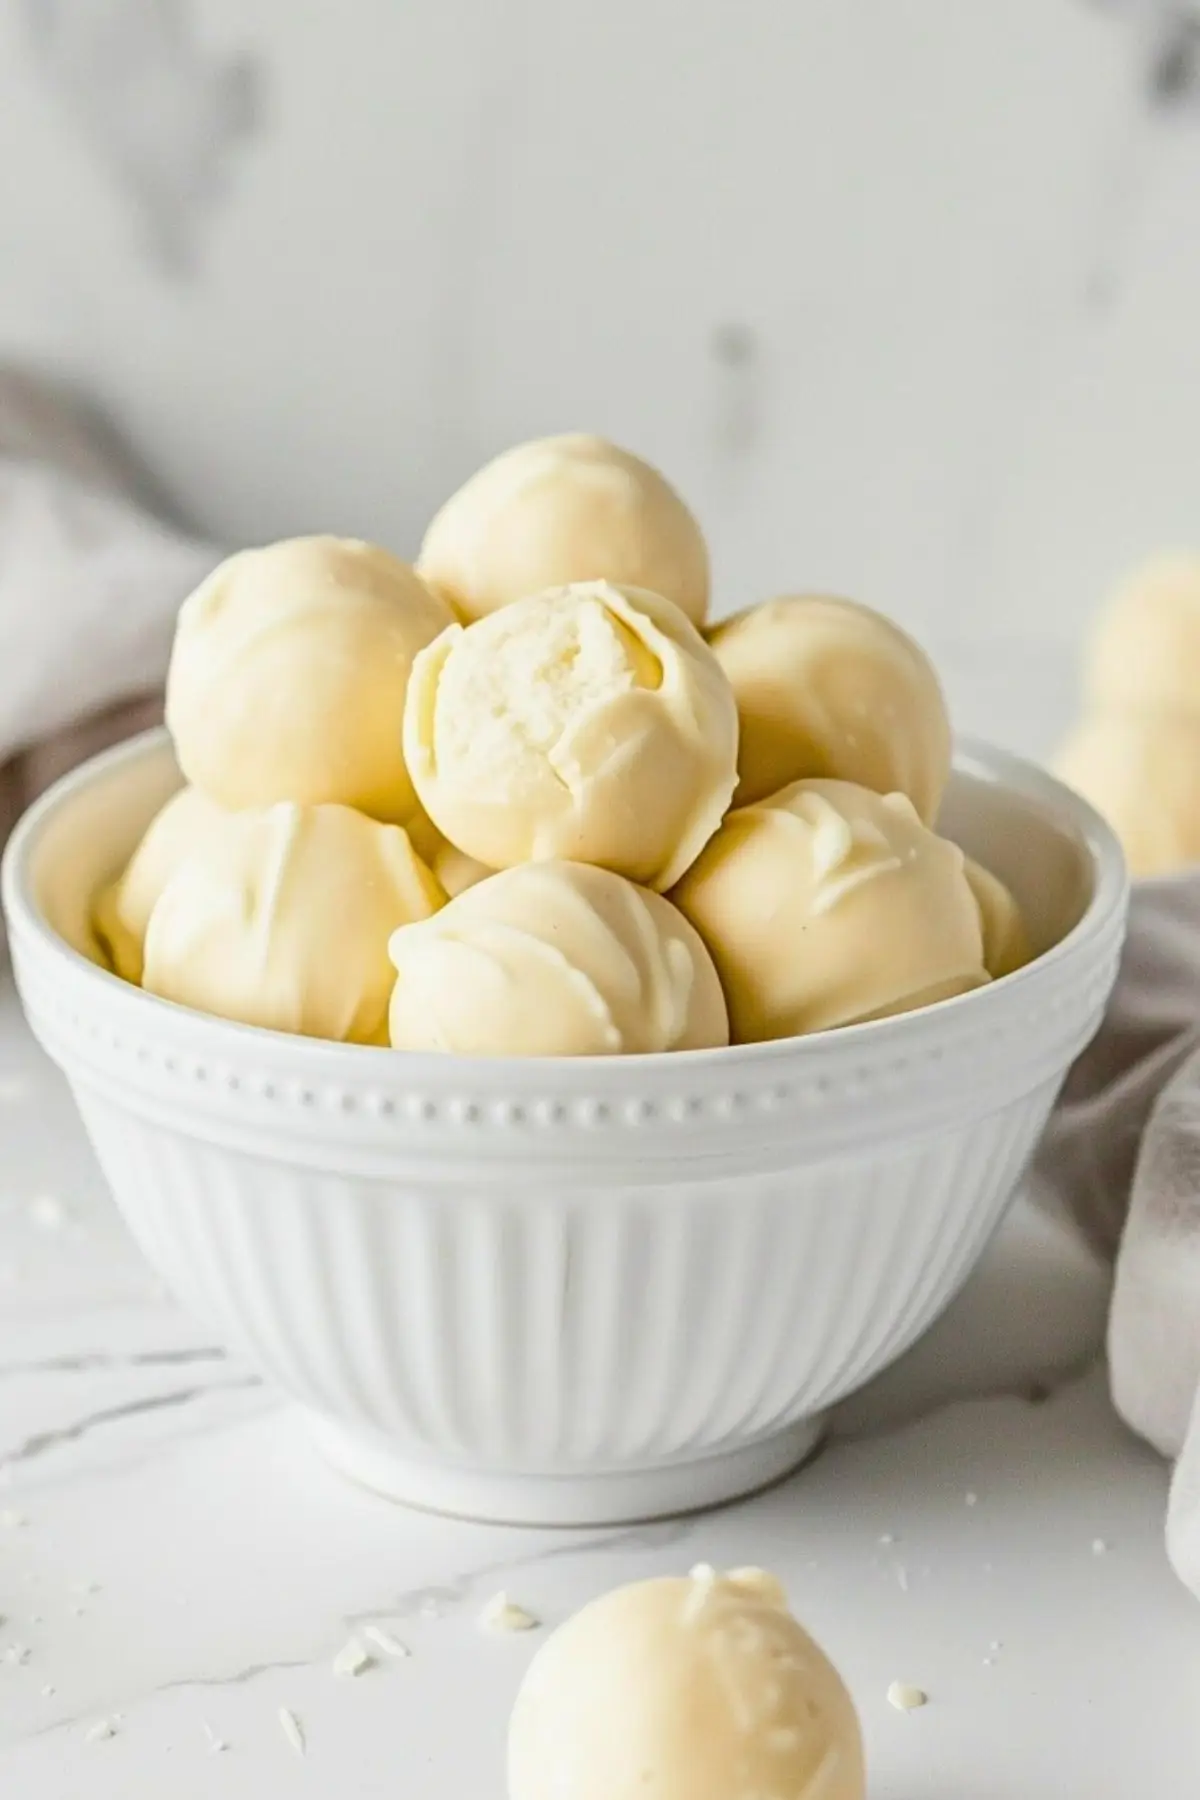 Bunch of white chocolate truffles in a bowl.